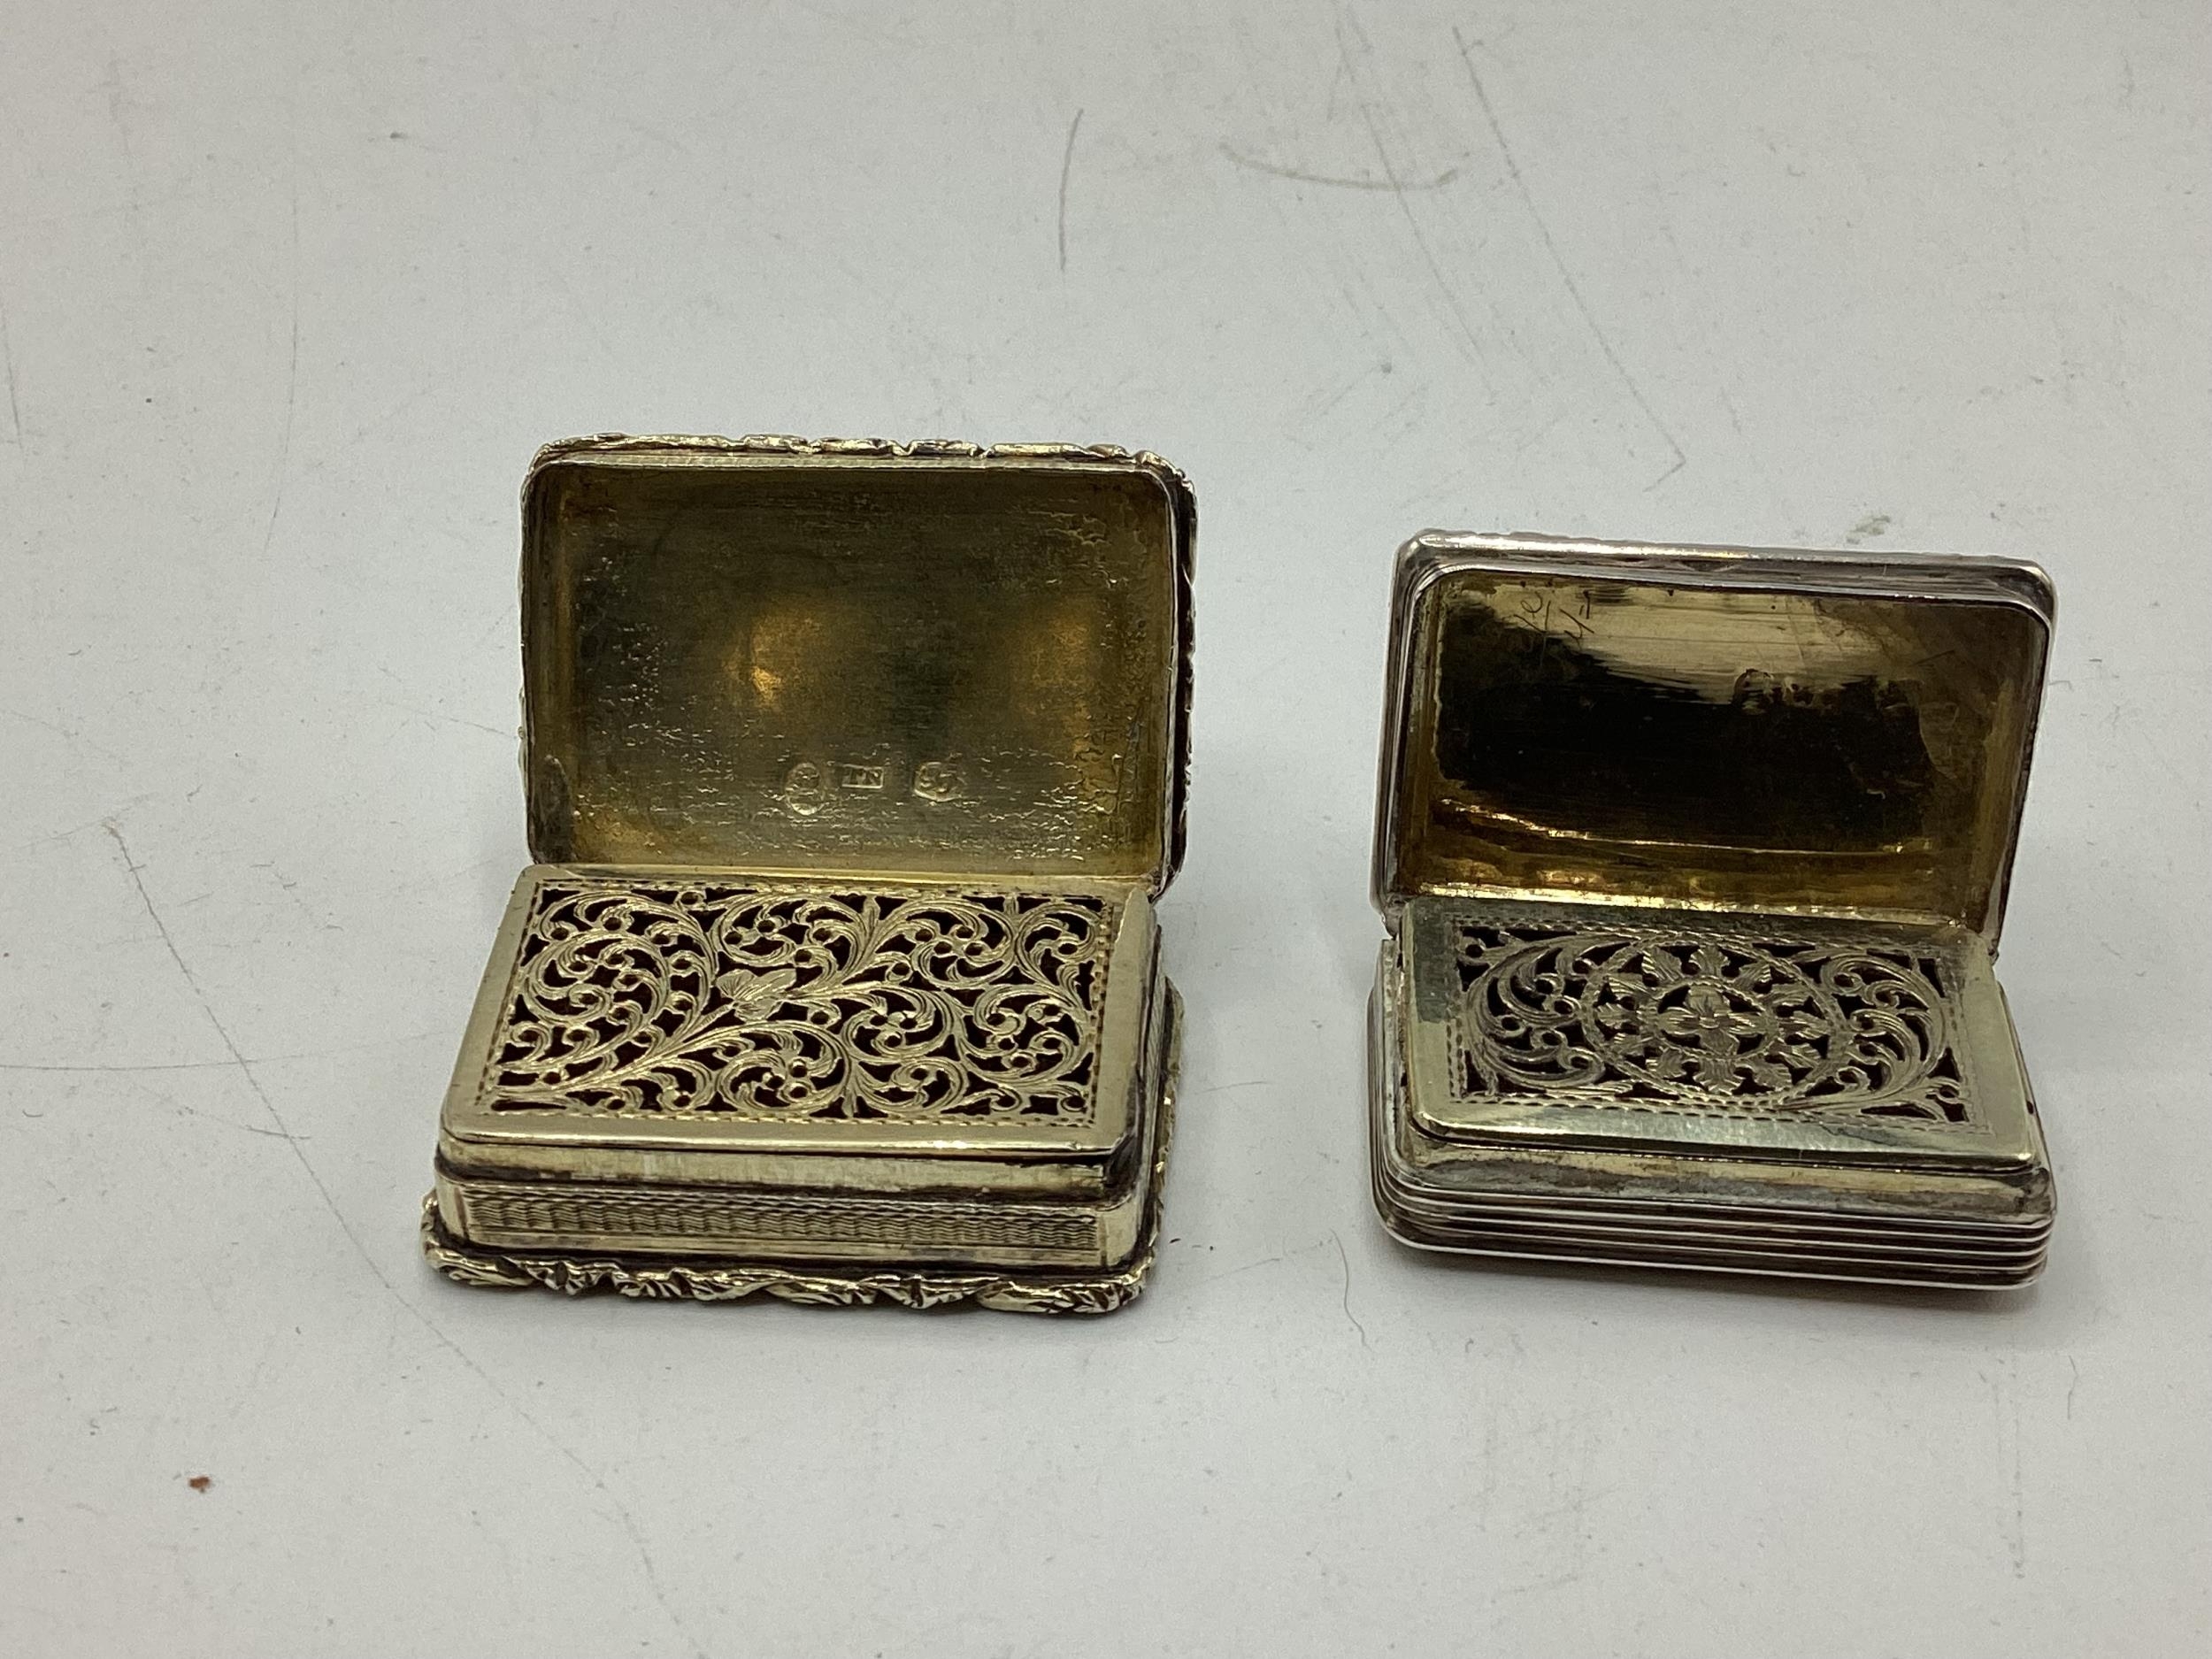 Two sterling silver vinaigrettes Thomas Newbold Birmingham 1830 with gilt interior and exterior, - Image 2 of 3